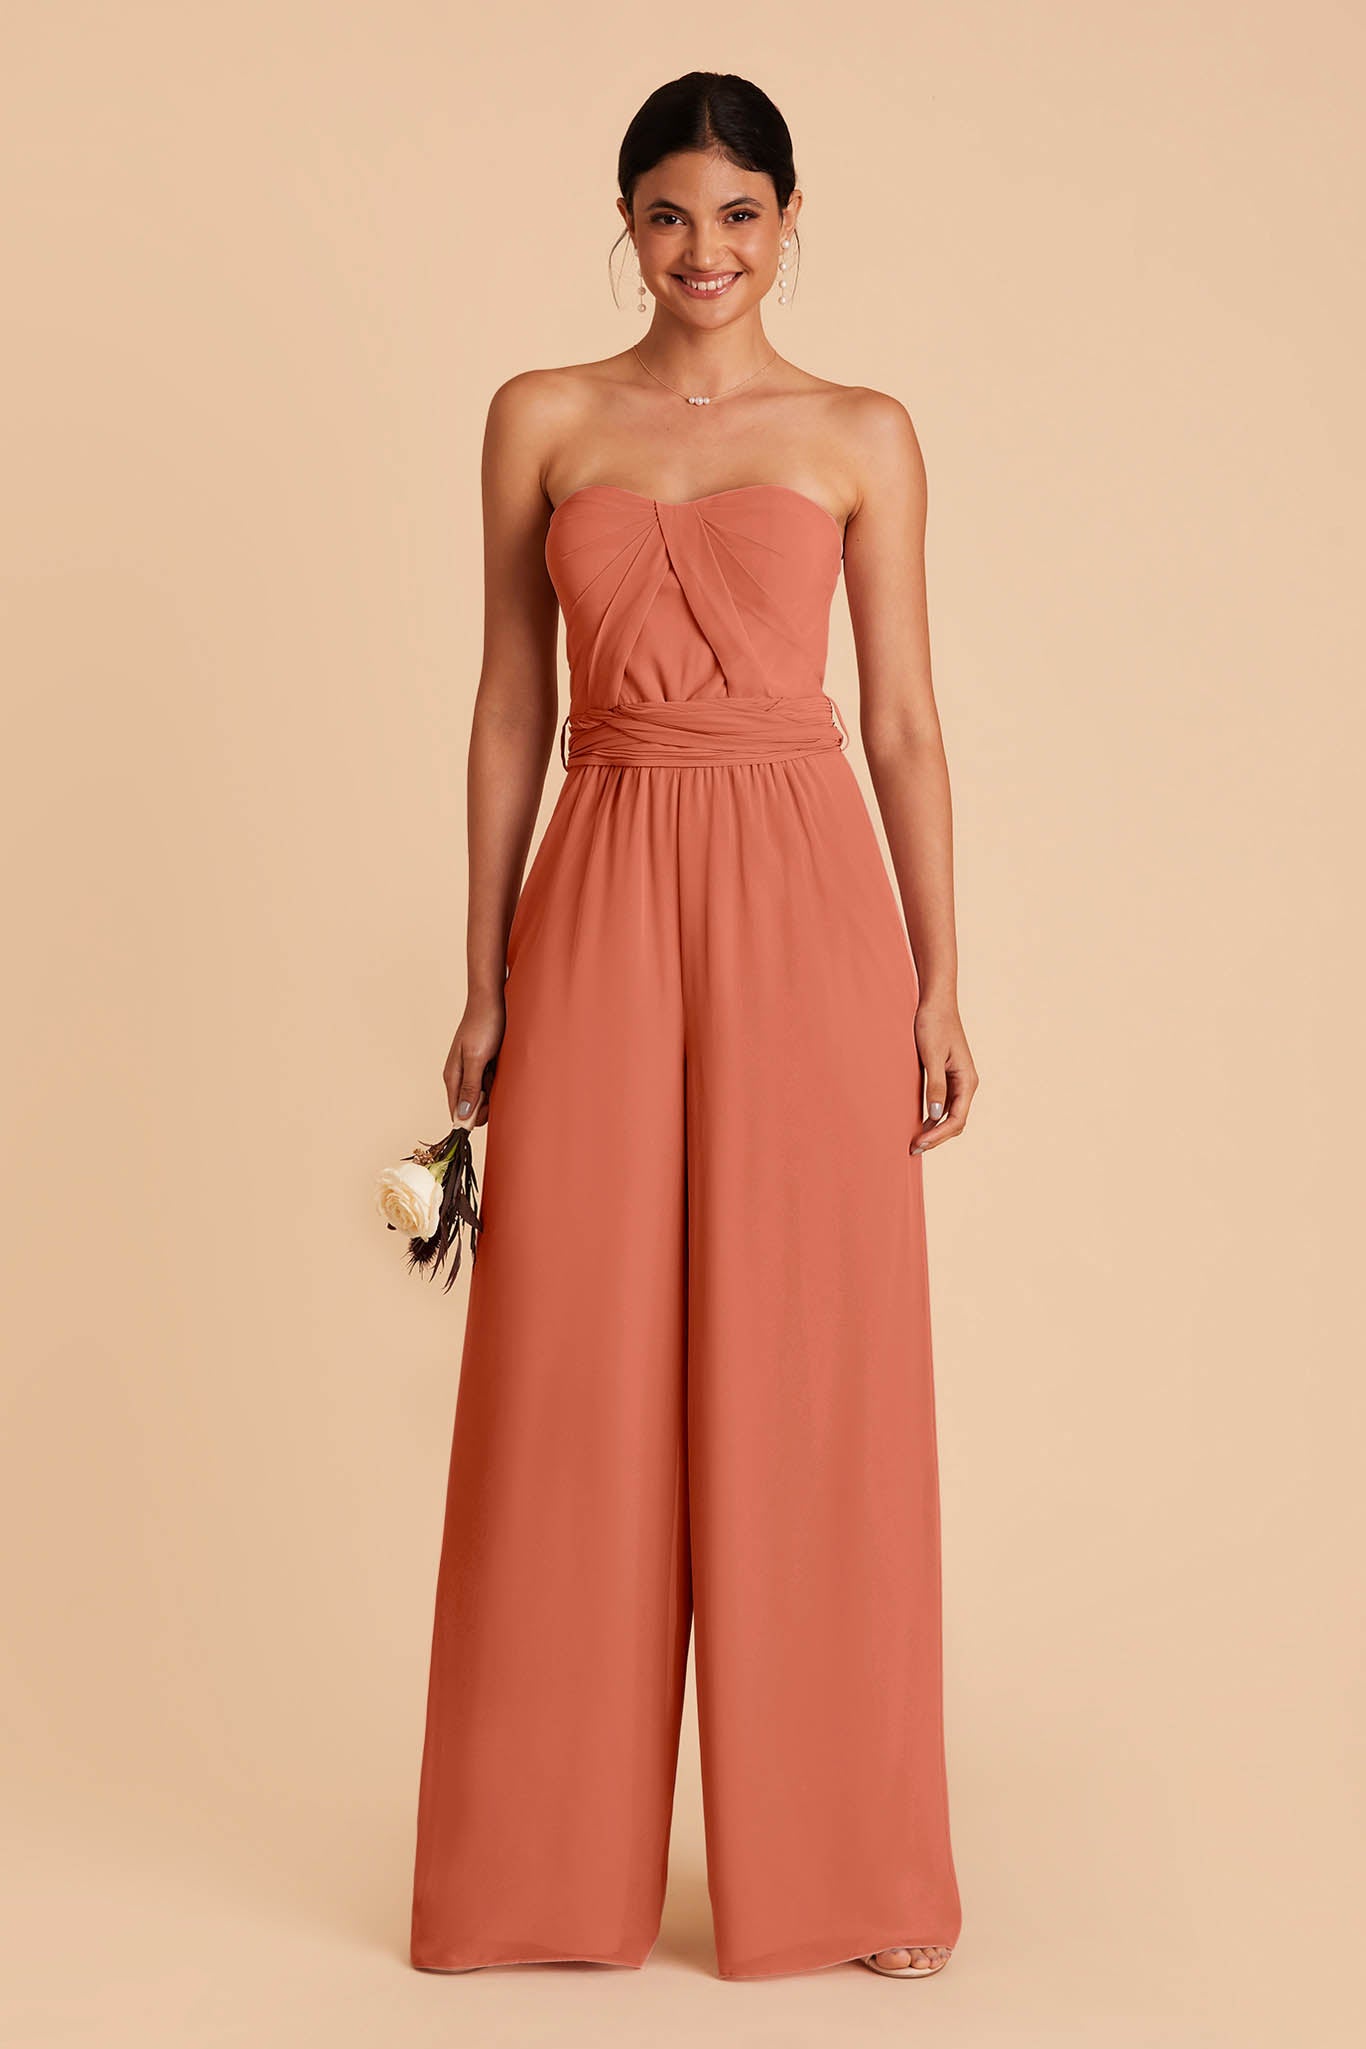 Light orange wedding jumpsuit with sweetheart bodice with convertible neckline